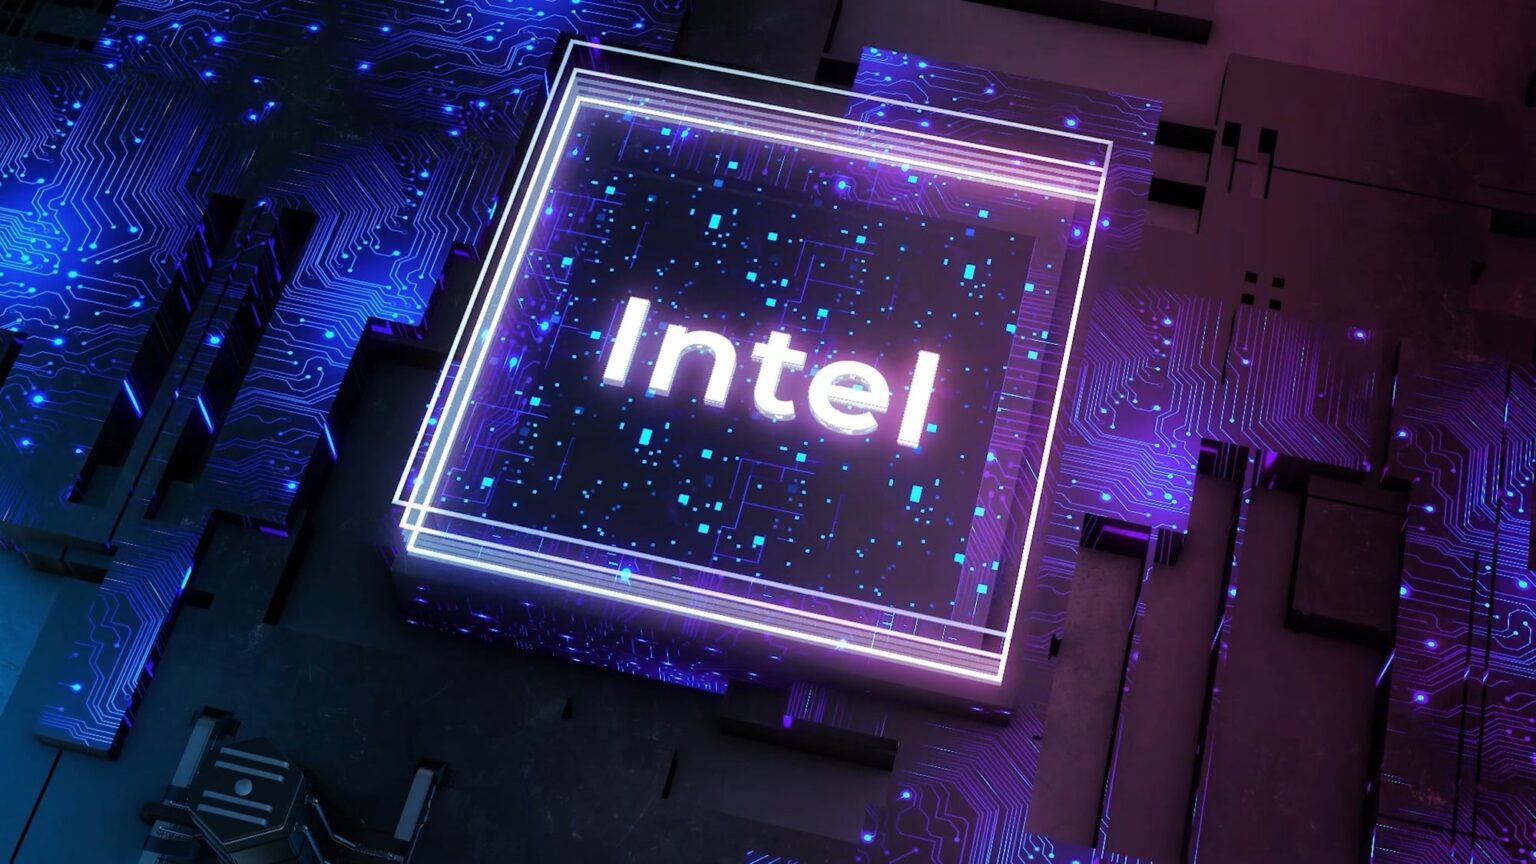 Intel shows the prototype of the technology behind the 2025 CPUs